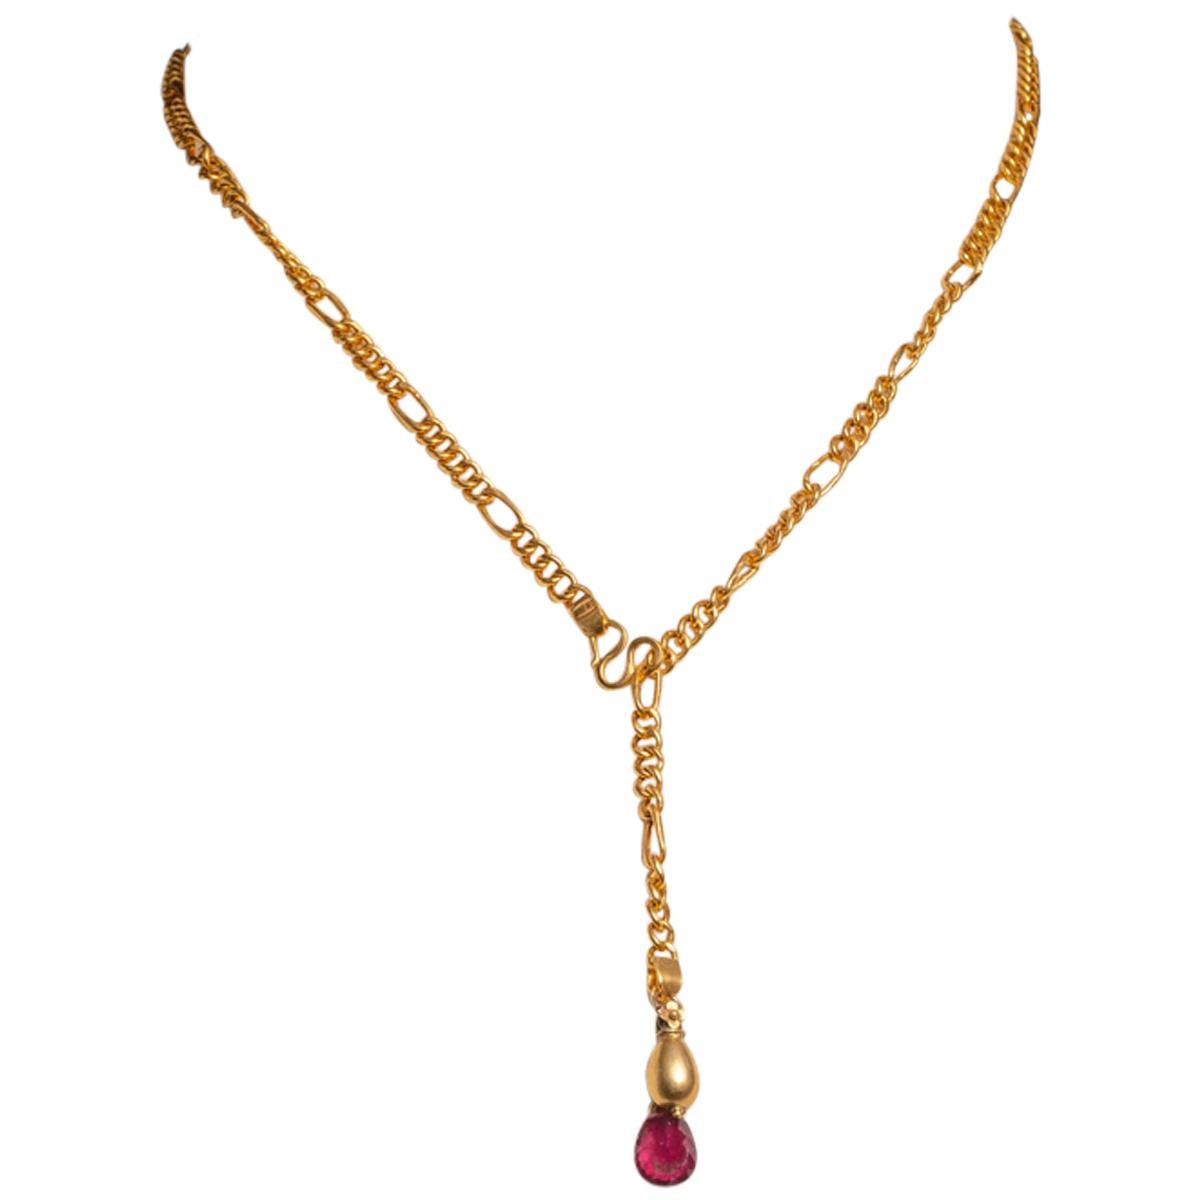 18 Karat Gold Chain Y-Necklace with Gold and Pink Tourmaline Pendant Drops